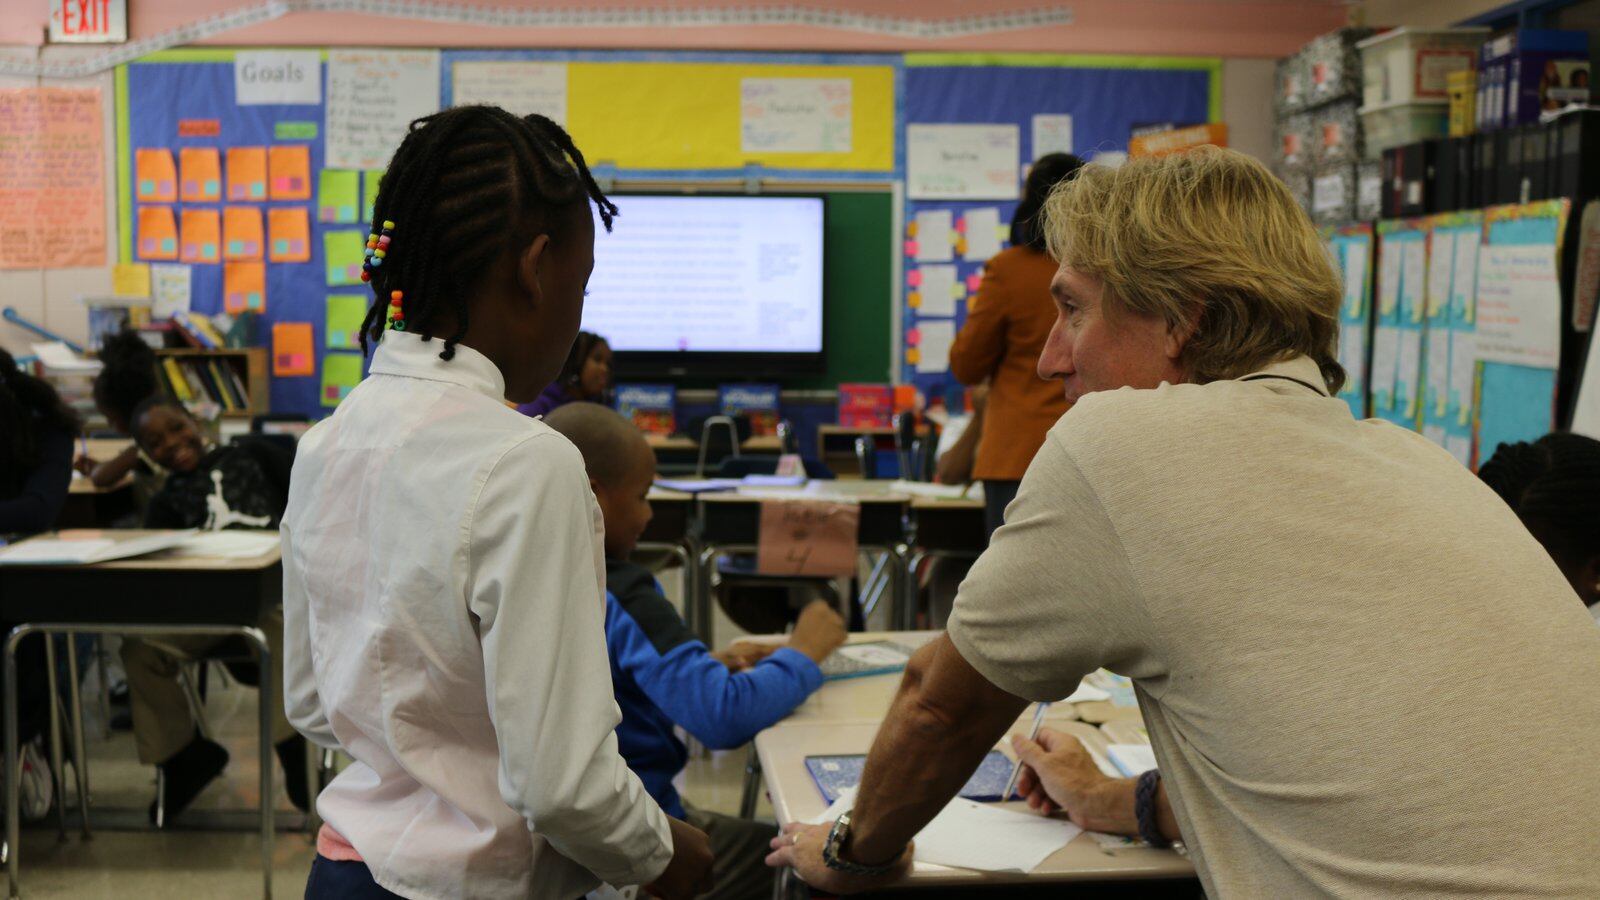 A teacher works at a desk with a young student with braided hair wearing a white dress shirt in the classroom.